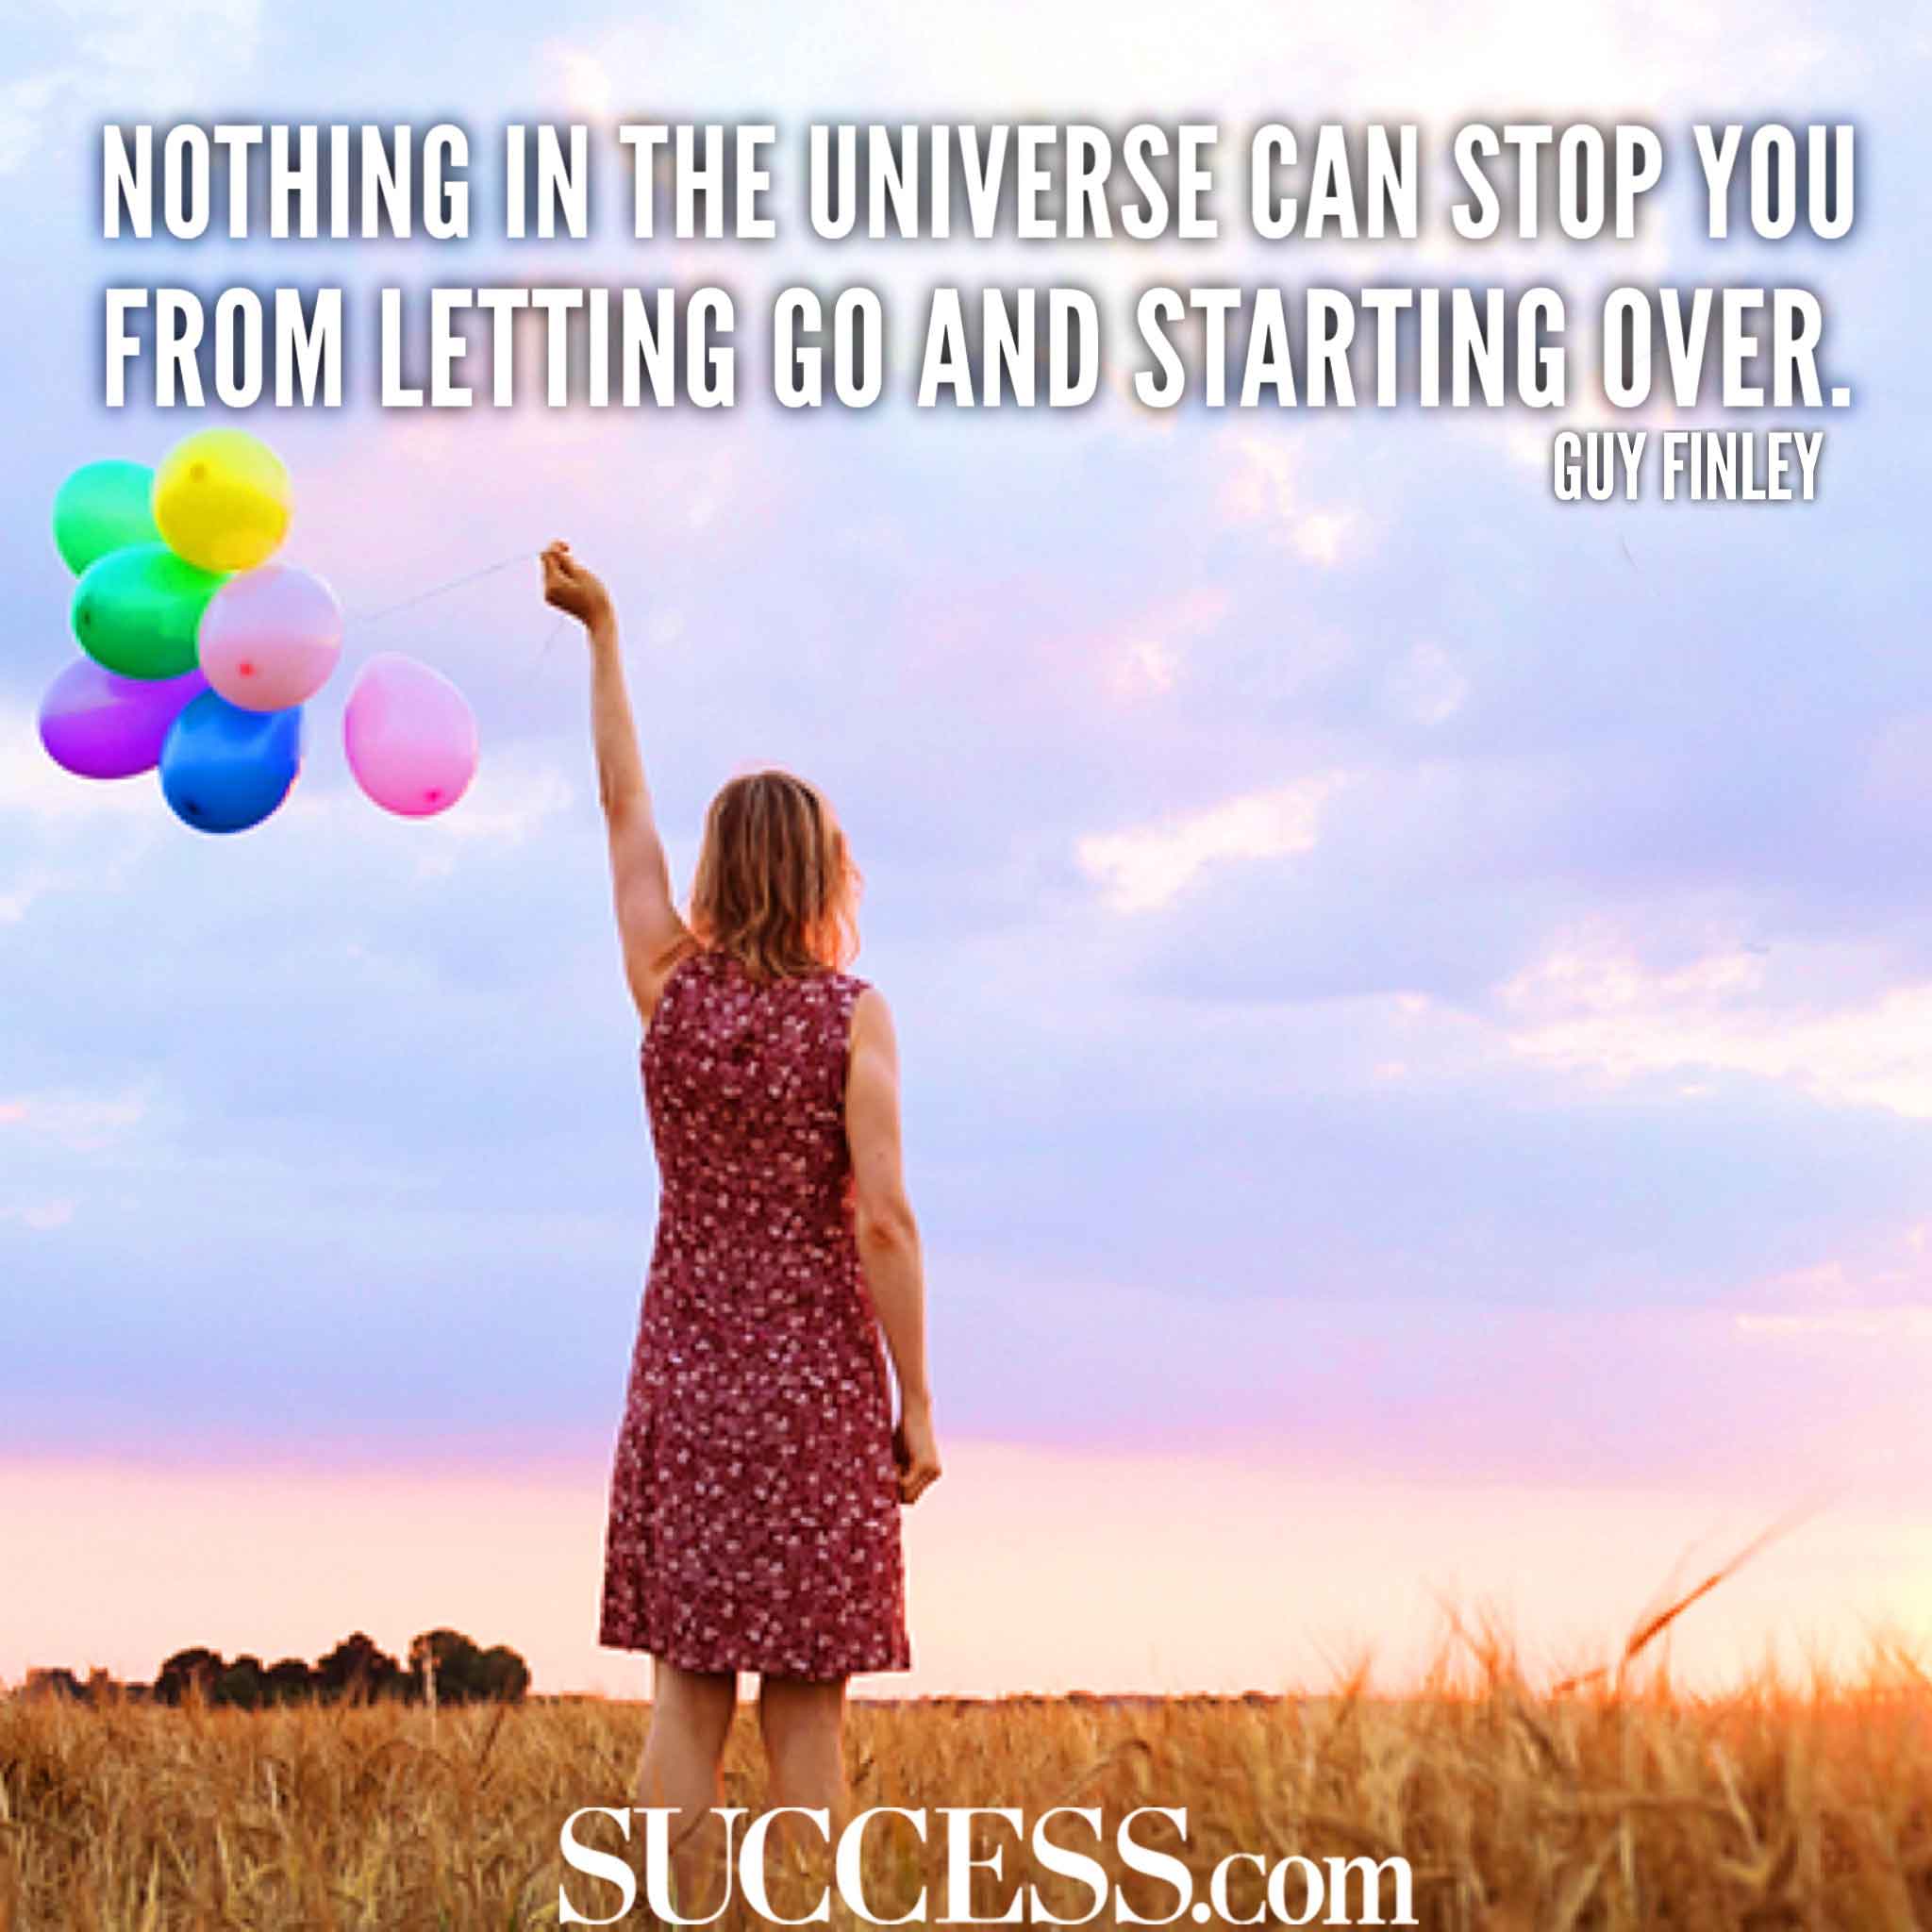 Quotes about new beginnings and moving on